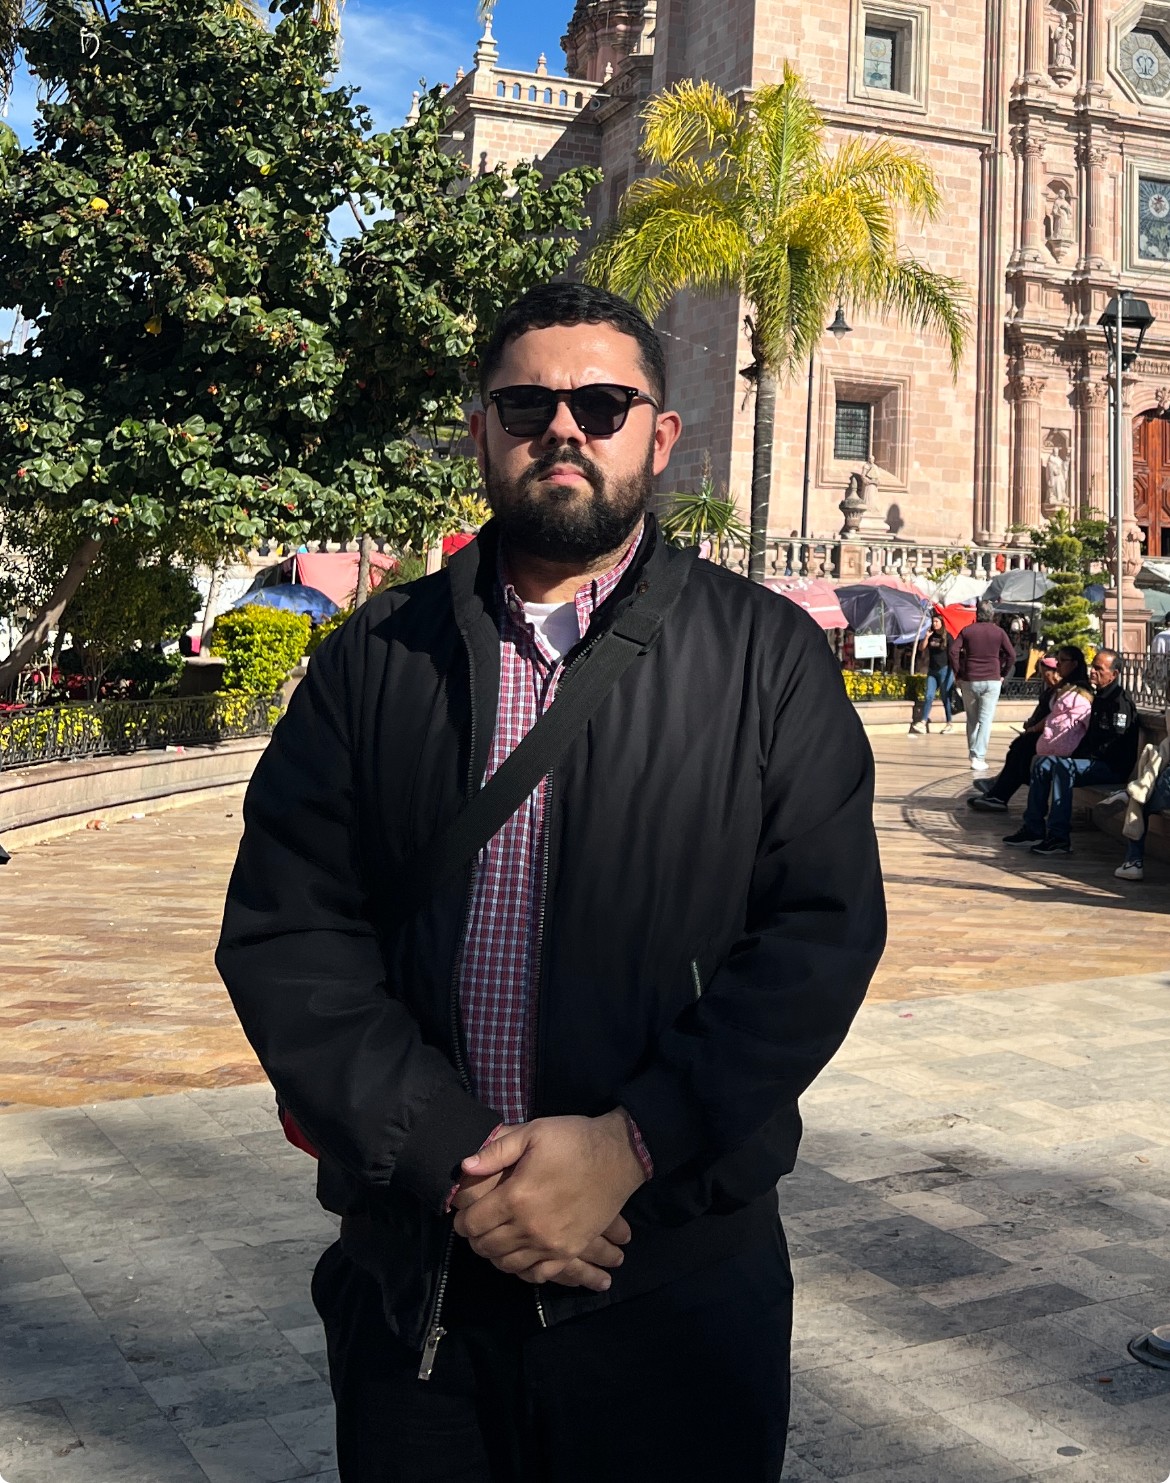 Dr. Mark A. Ocegueda, sunglasses and hands clasped, stands in front of a building facade